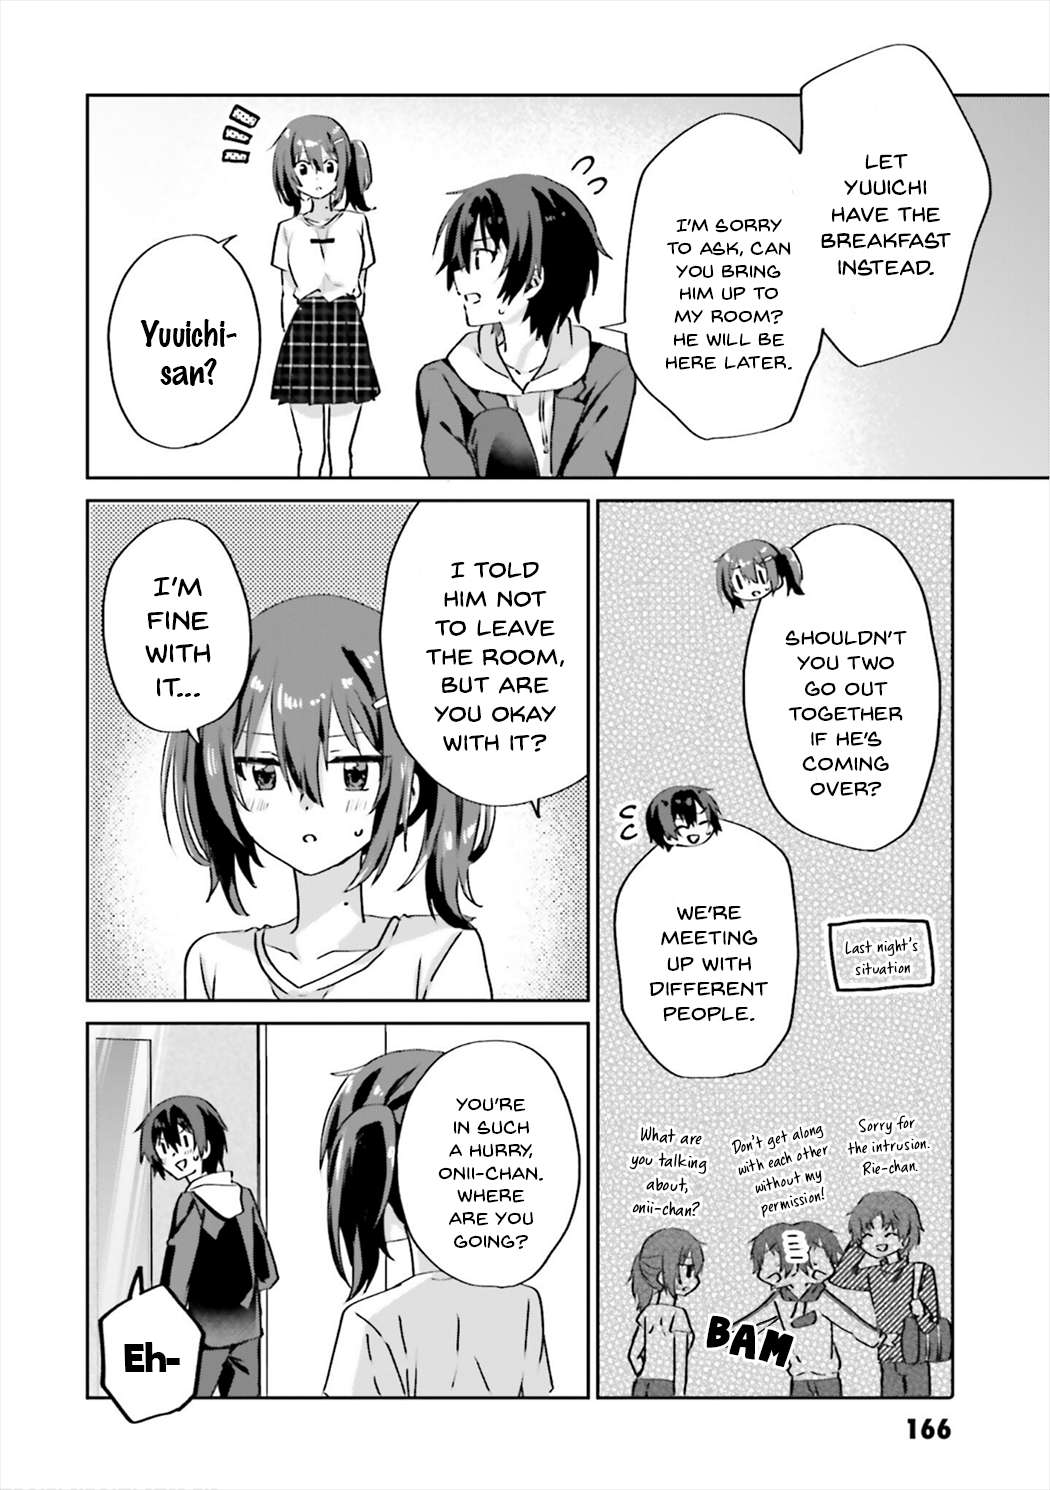 Since I’Ve Entered The World Of Romantic Comedy Manga, I’Ll Do My Best To Make The Losing Heroine Happy - chapter 6.5 - #2